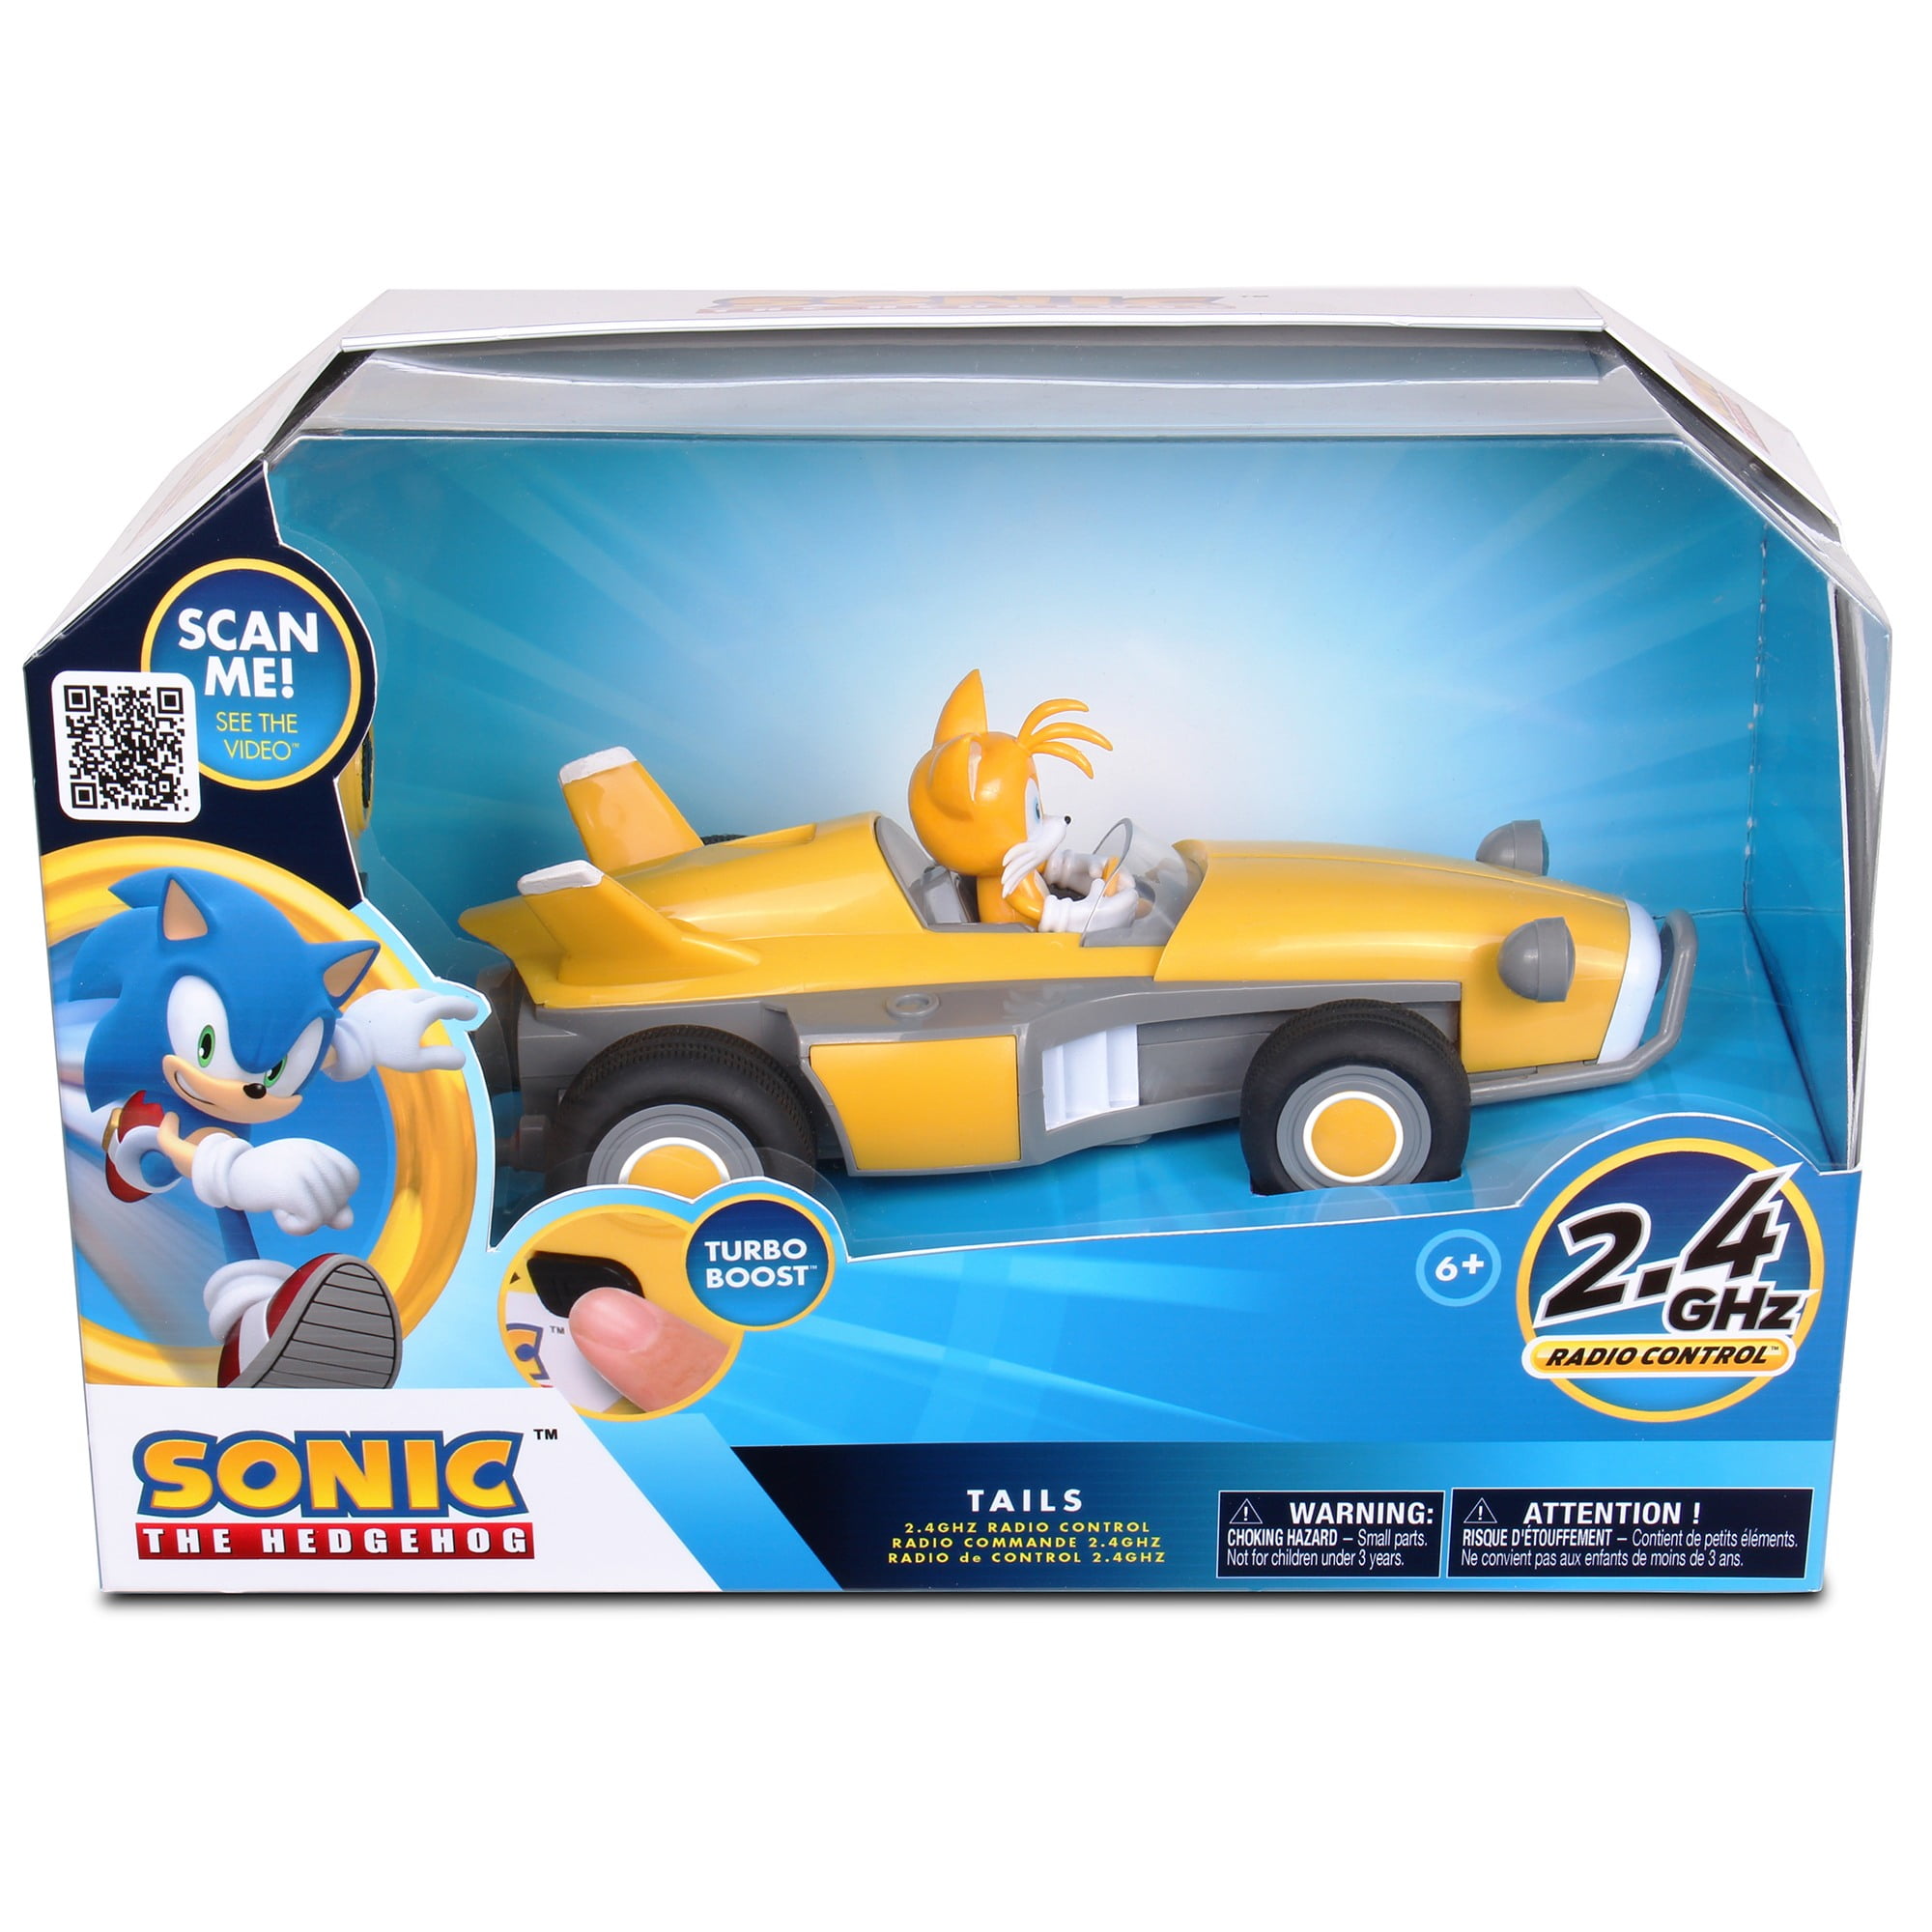 Sonic the Hedgehog 2 - Sonic Speed Remote Control R/C Inspired by